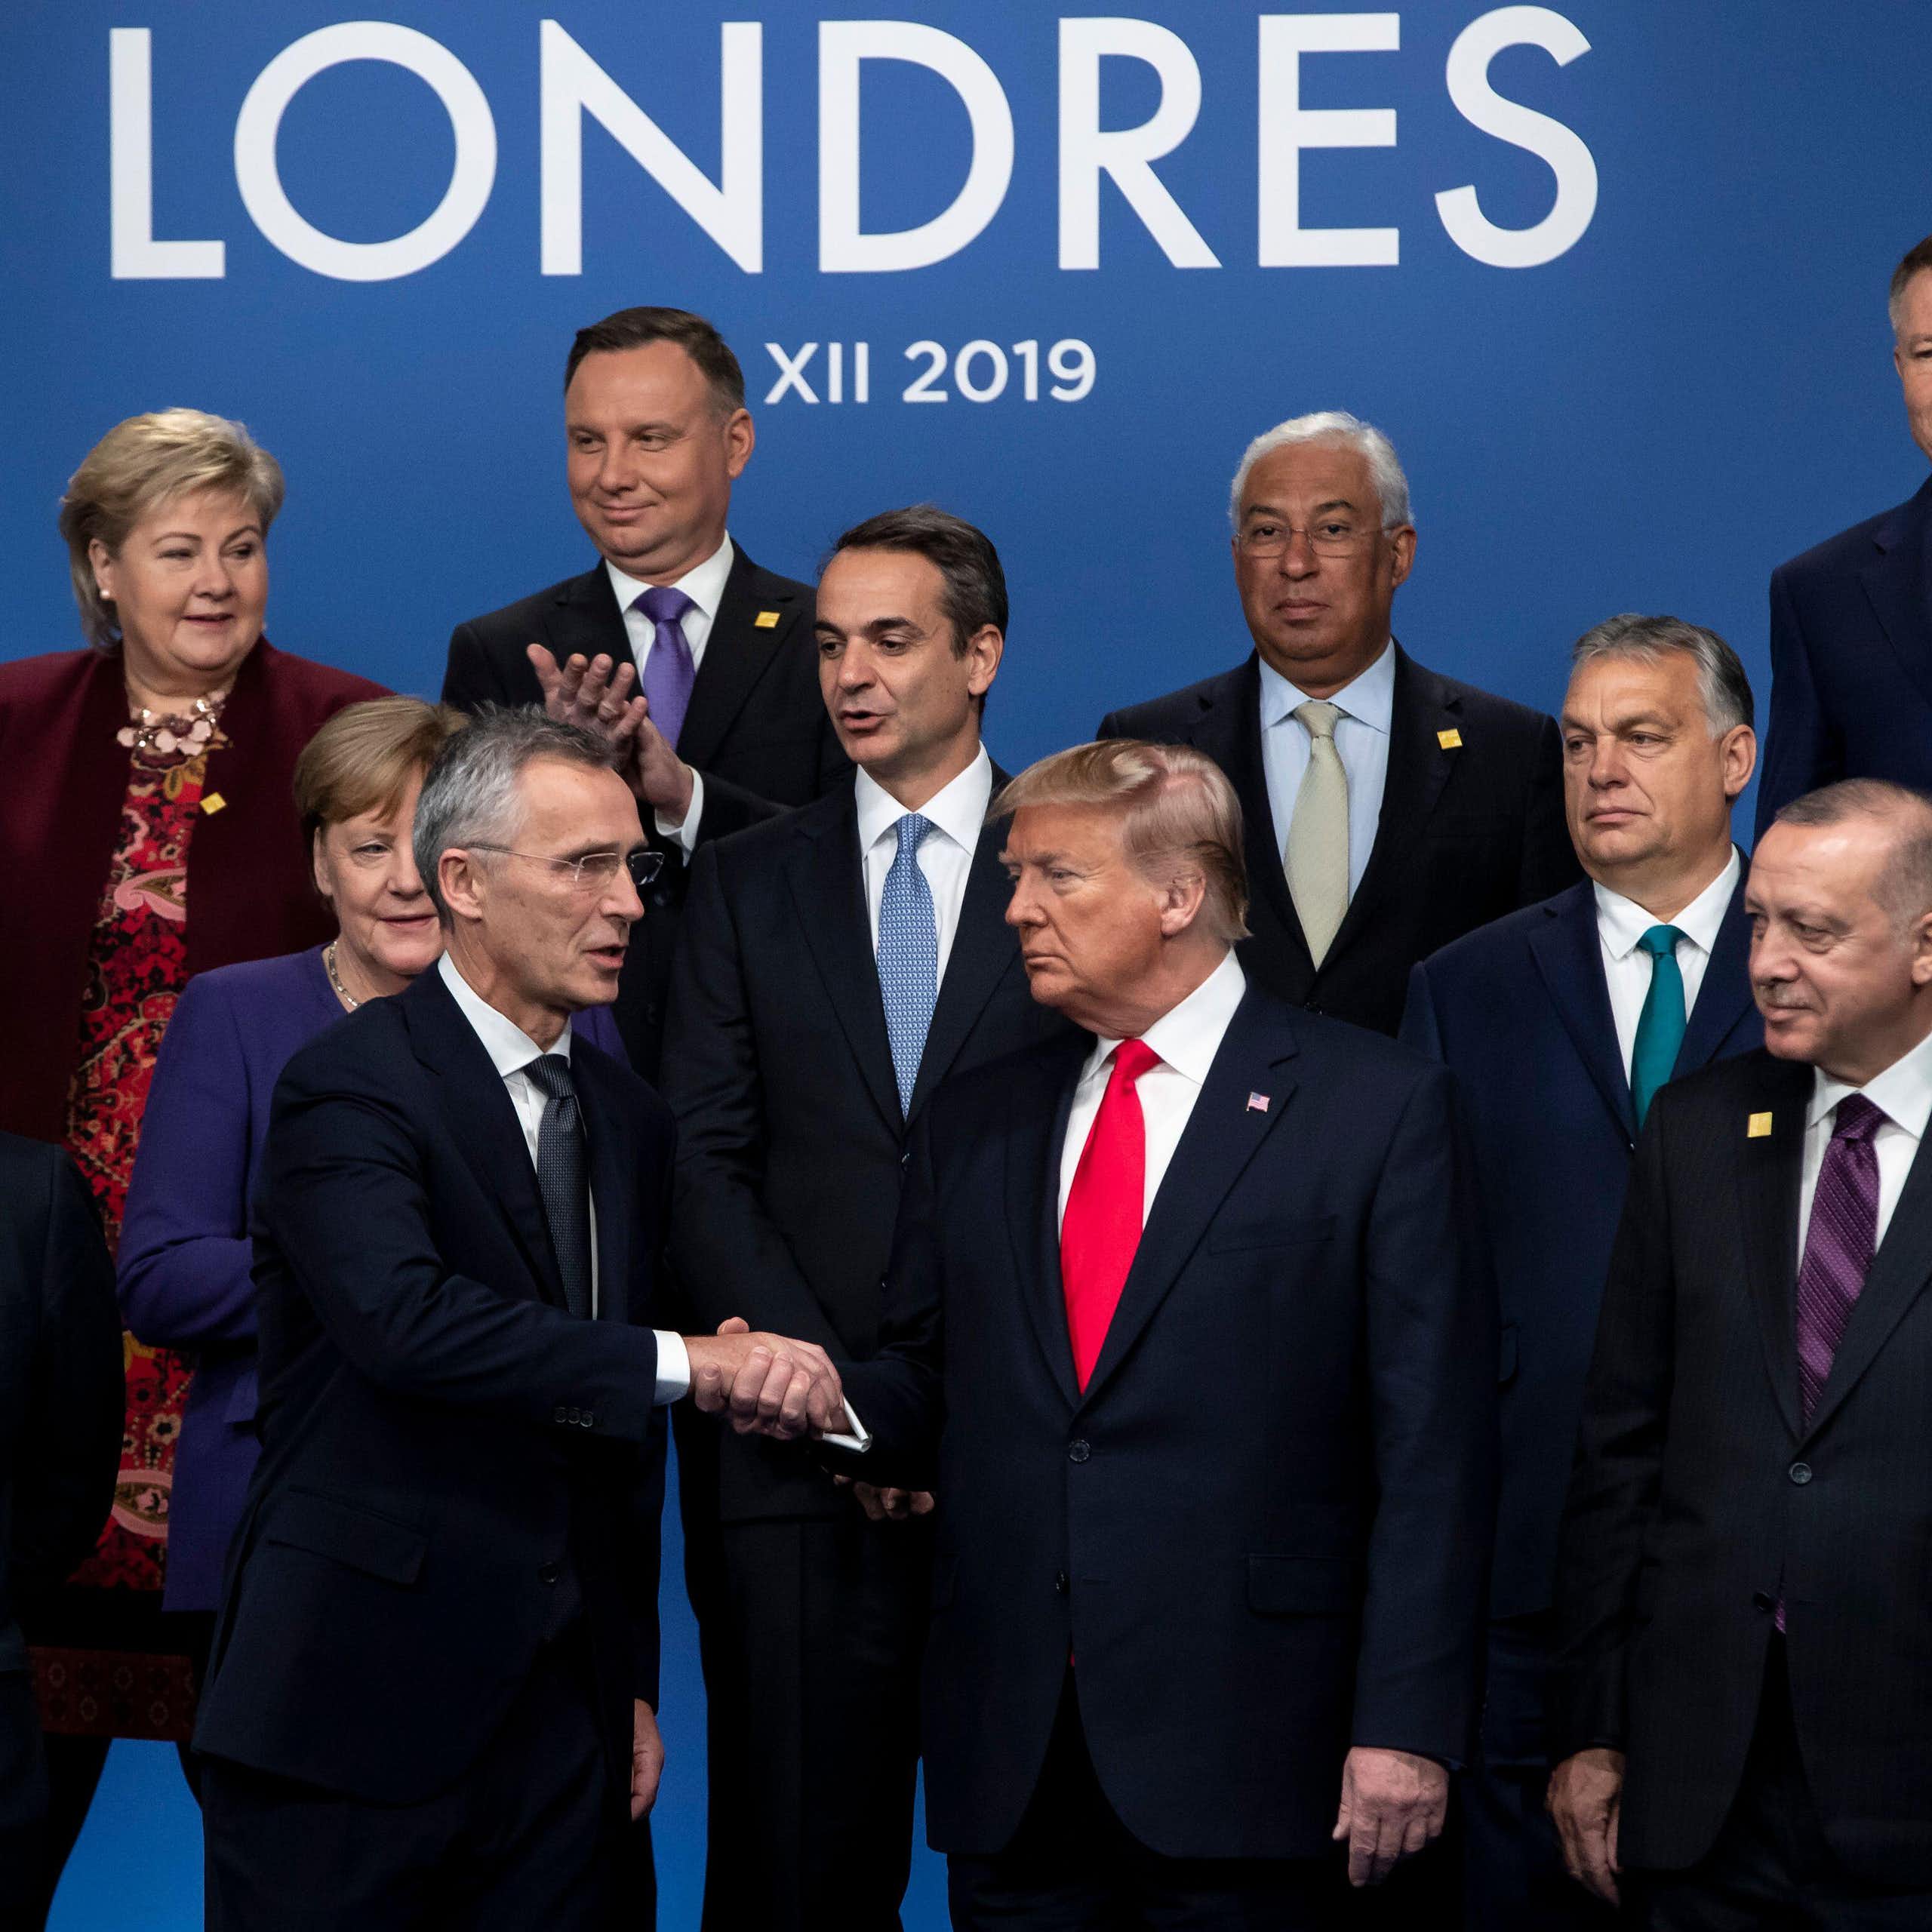 Donald Trump in middle of picture, at Nato meeting in 2019, surrounded by Nato leaders.